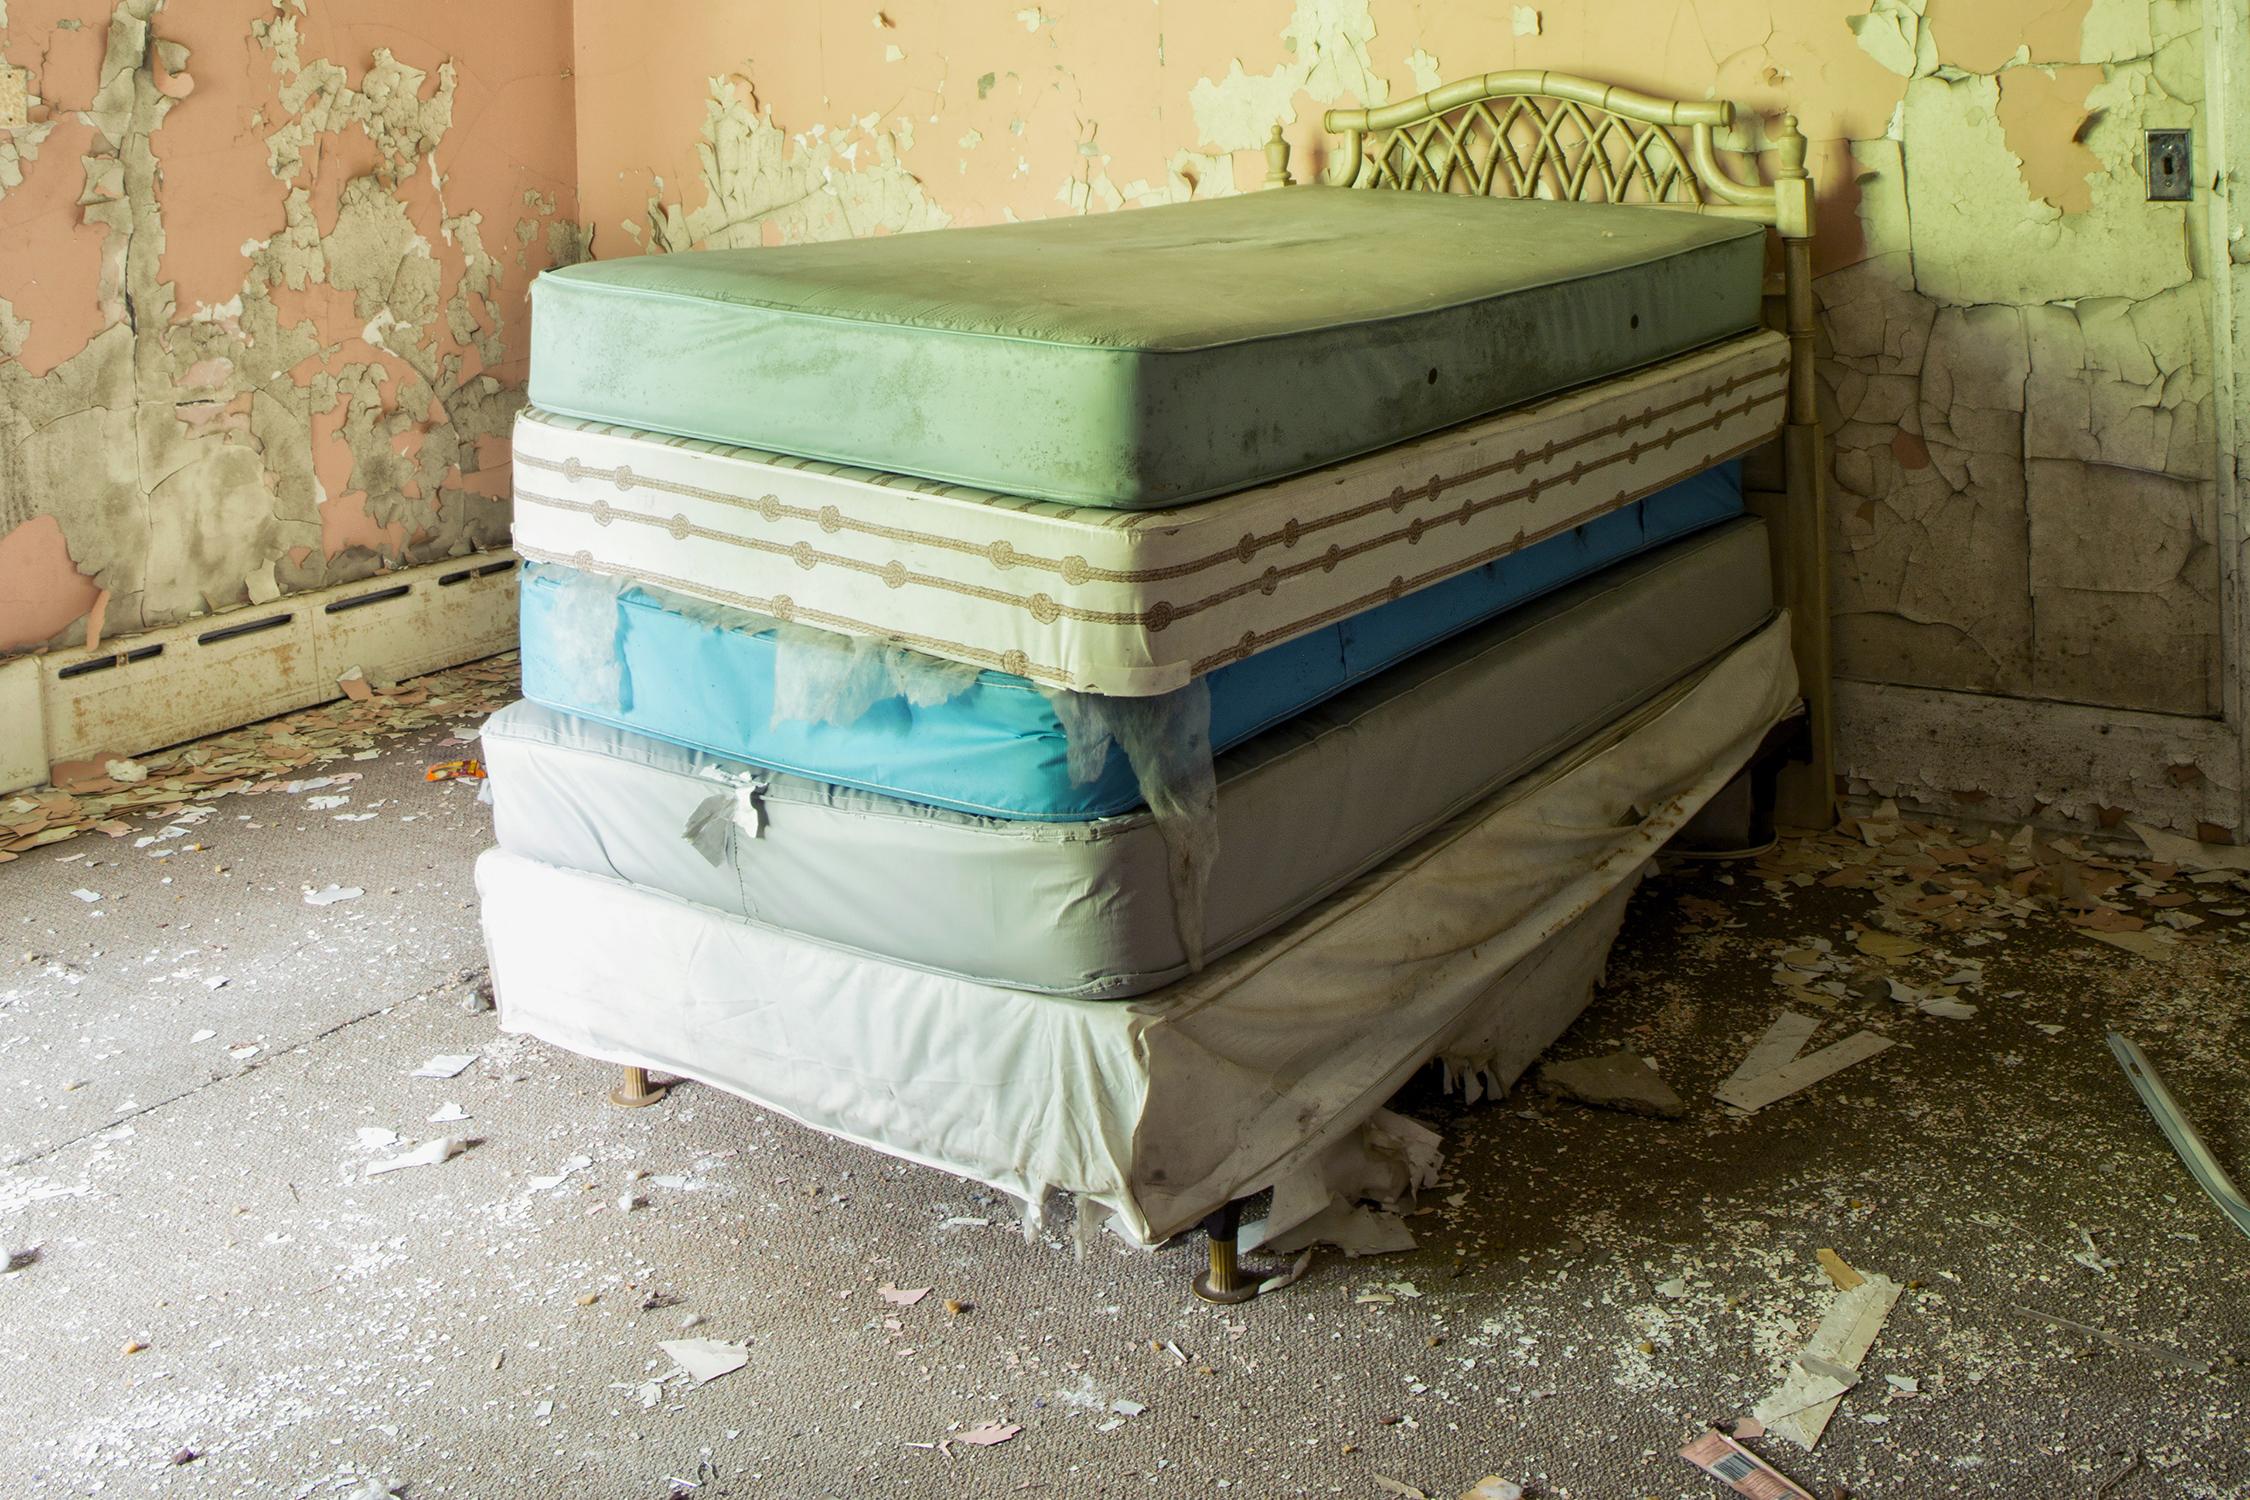 Rebecca Skinner’s “Dream” is a 18 x 12 inch color photograph of a stack of old mattresses stacked on top of each other in the interior of an abandoned building. Peeling paint in peach, yellow and white demonstrate the passing of time. The frameless